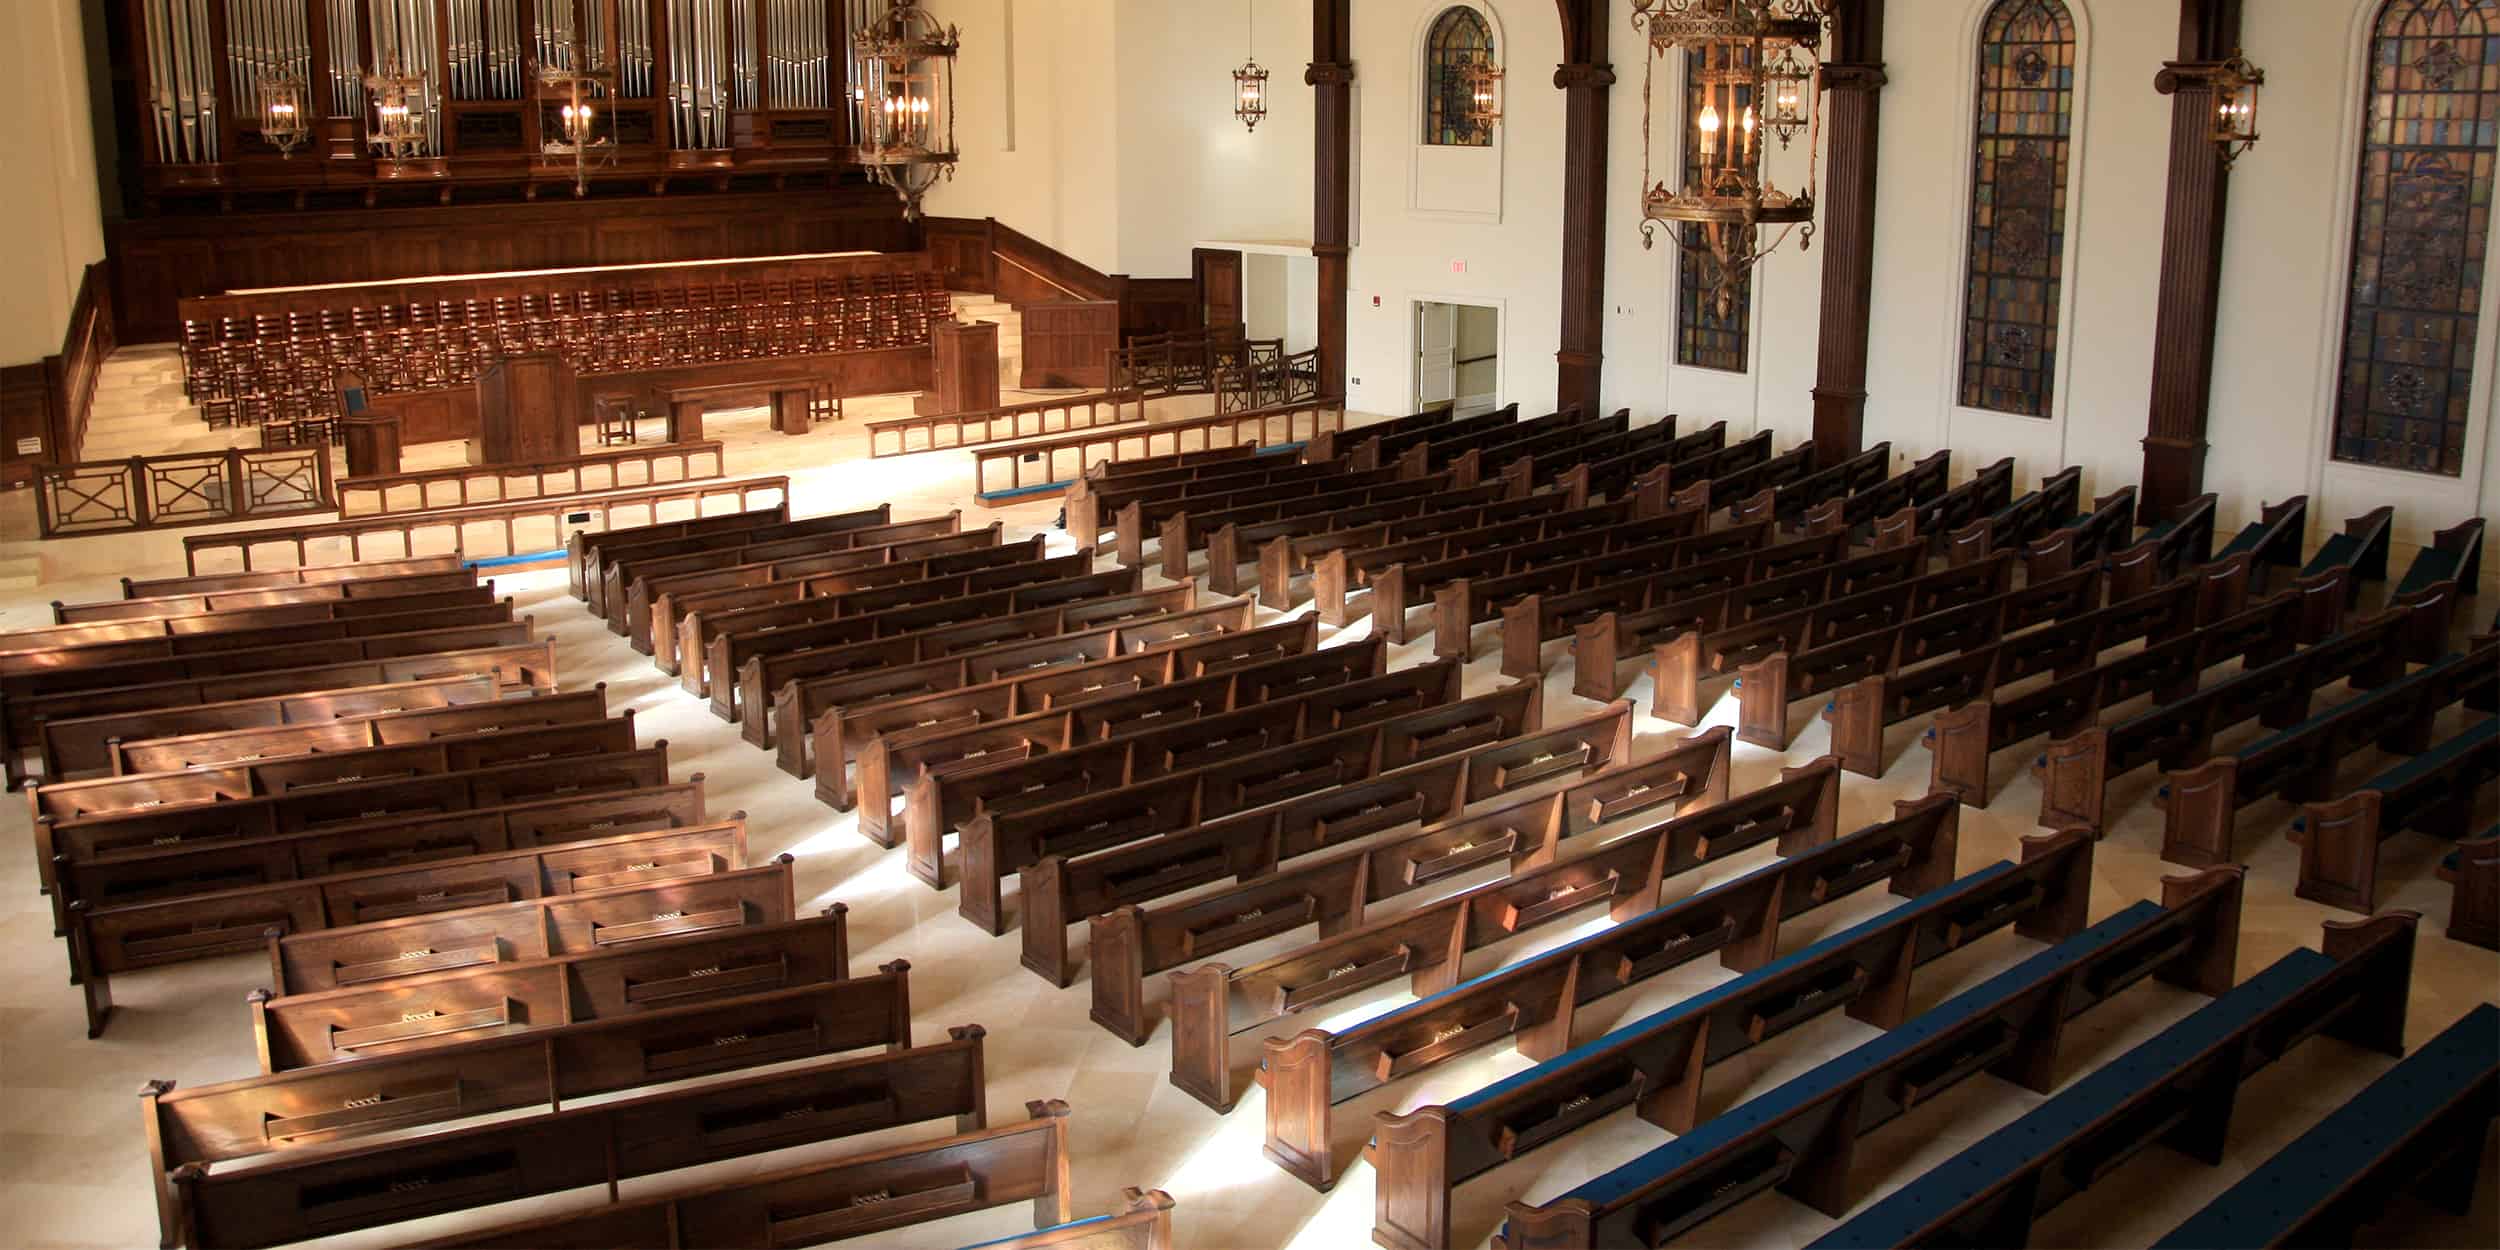 View from balcony of Sauder Church Furniture pews.